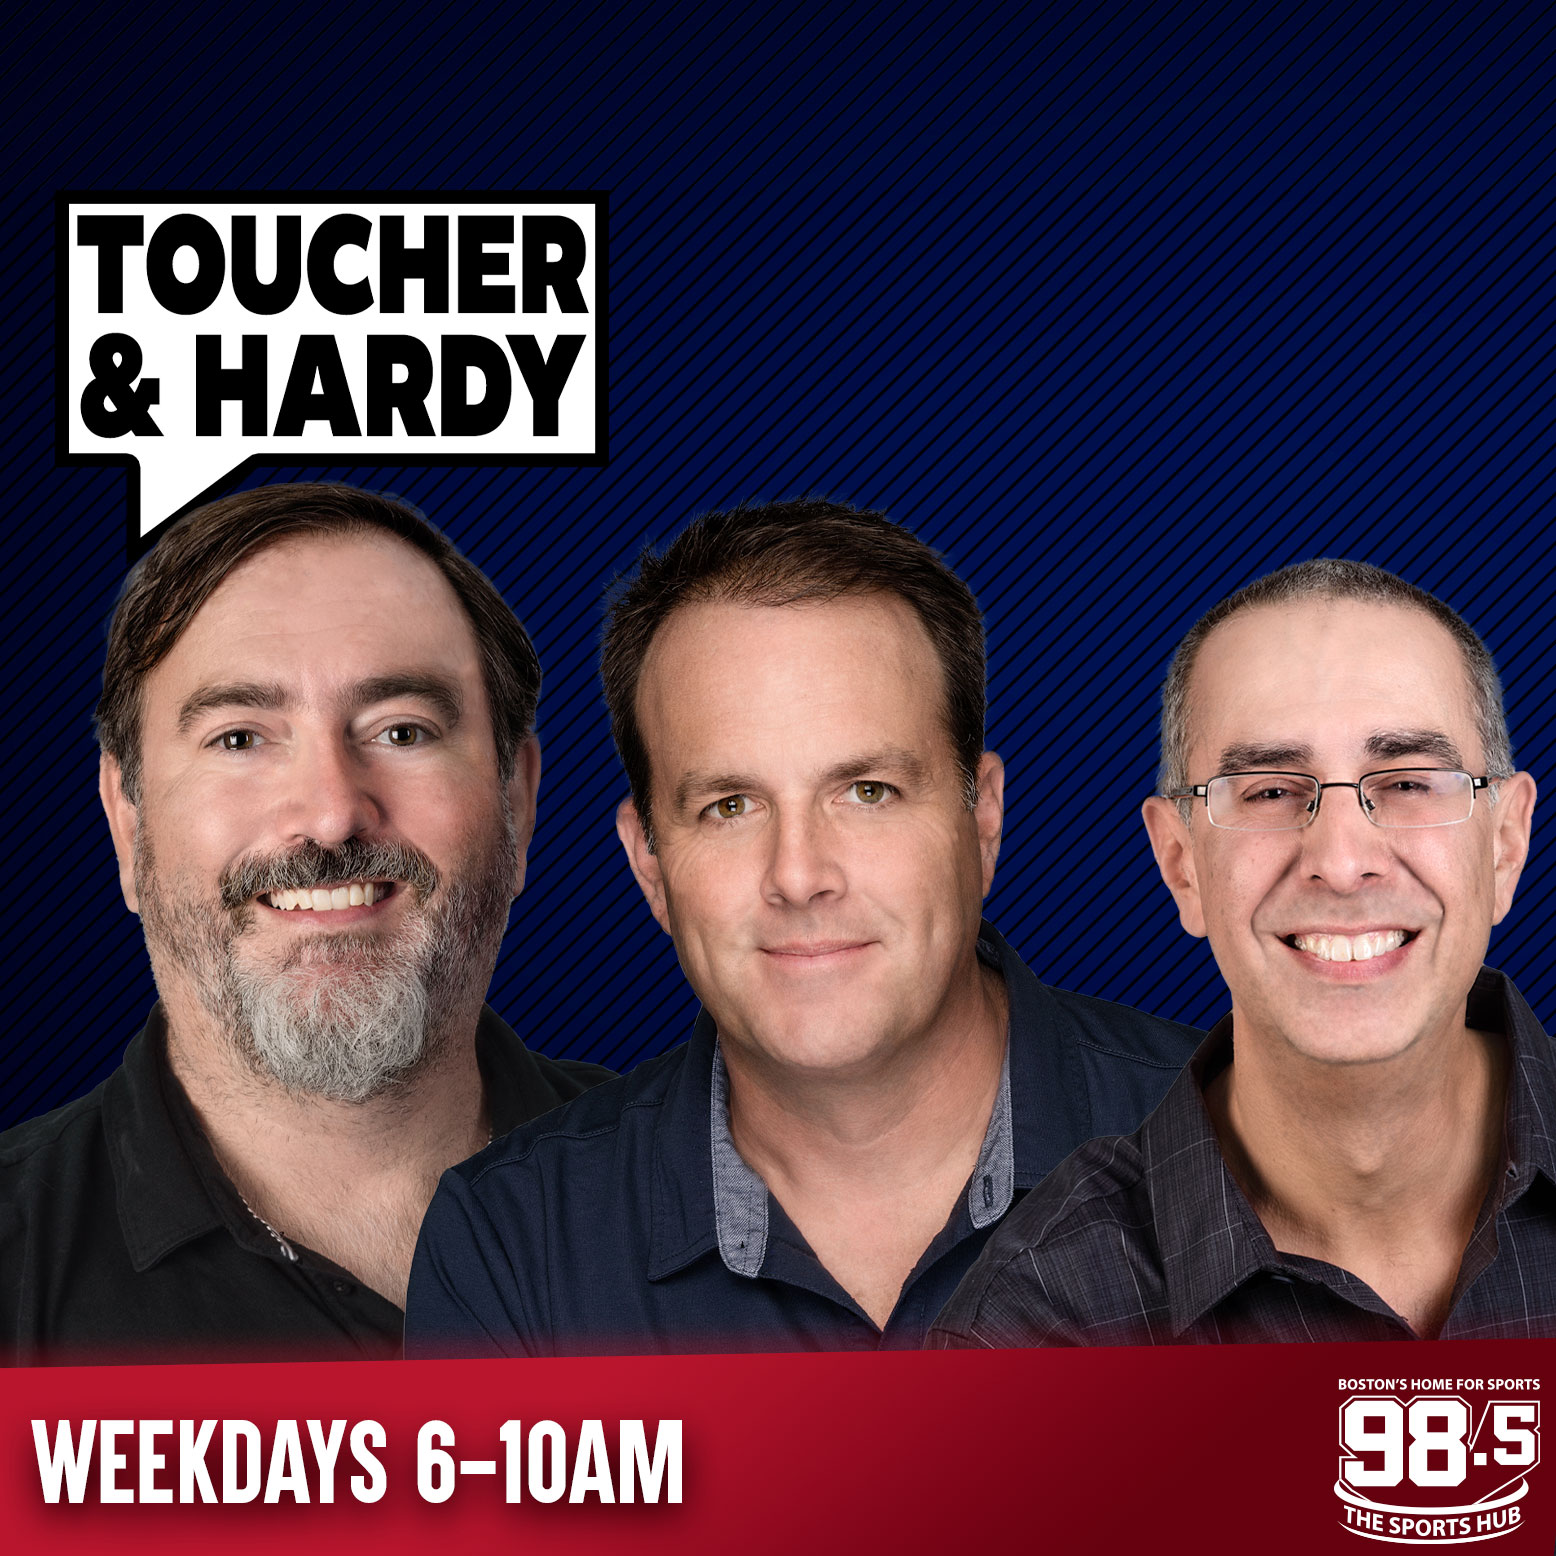 Rich, Joe Murray & Christian Arcand // No Plans for NBA Shut Down // Cole Beasley OUT for Bills/Patriots - 12/22 (Hour 1)